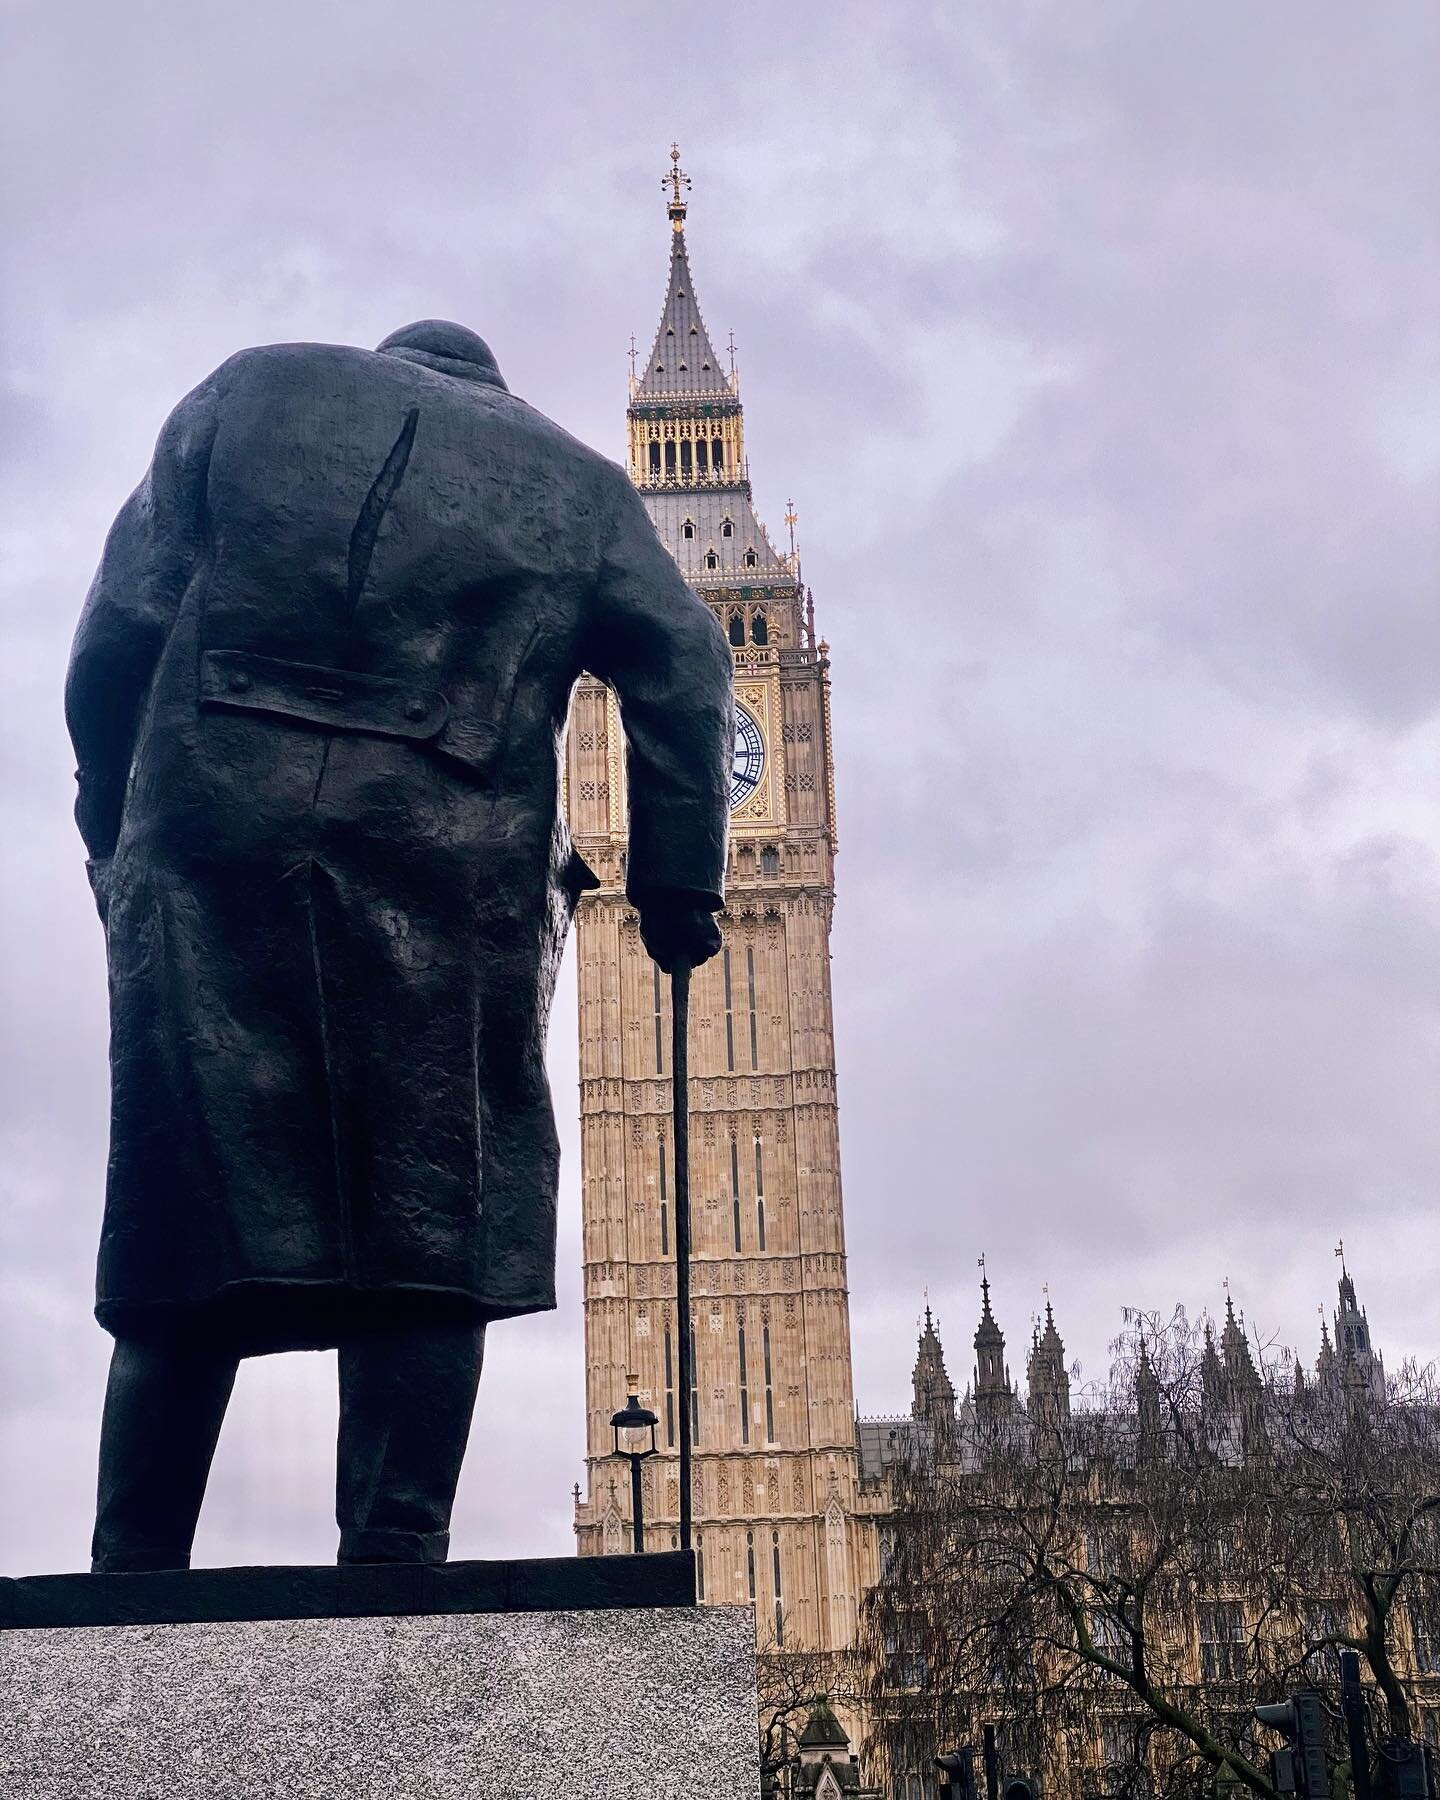 Back in Blighty and February of oh dear.
The weather is Macbeth gray. 
But hello Winston and my first tour of the season. 
Winston Churchill will be have passed 59 years ago, later this month. 
His story remains compelling and needing to be heard. A 